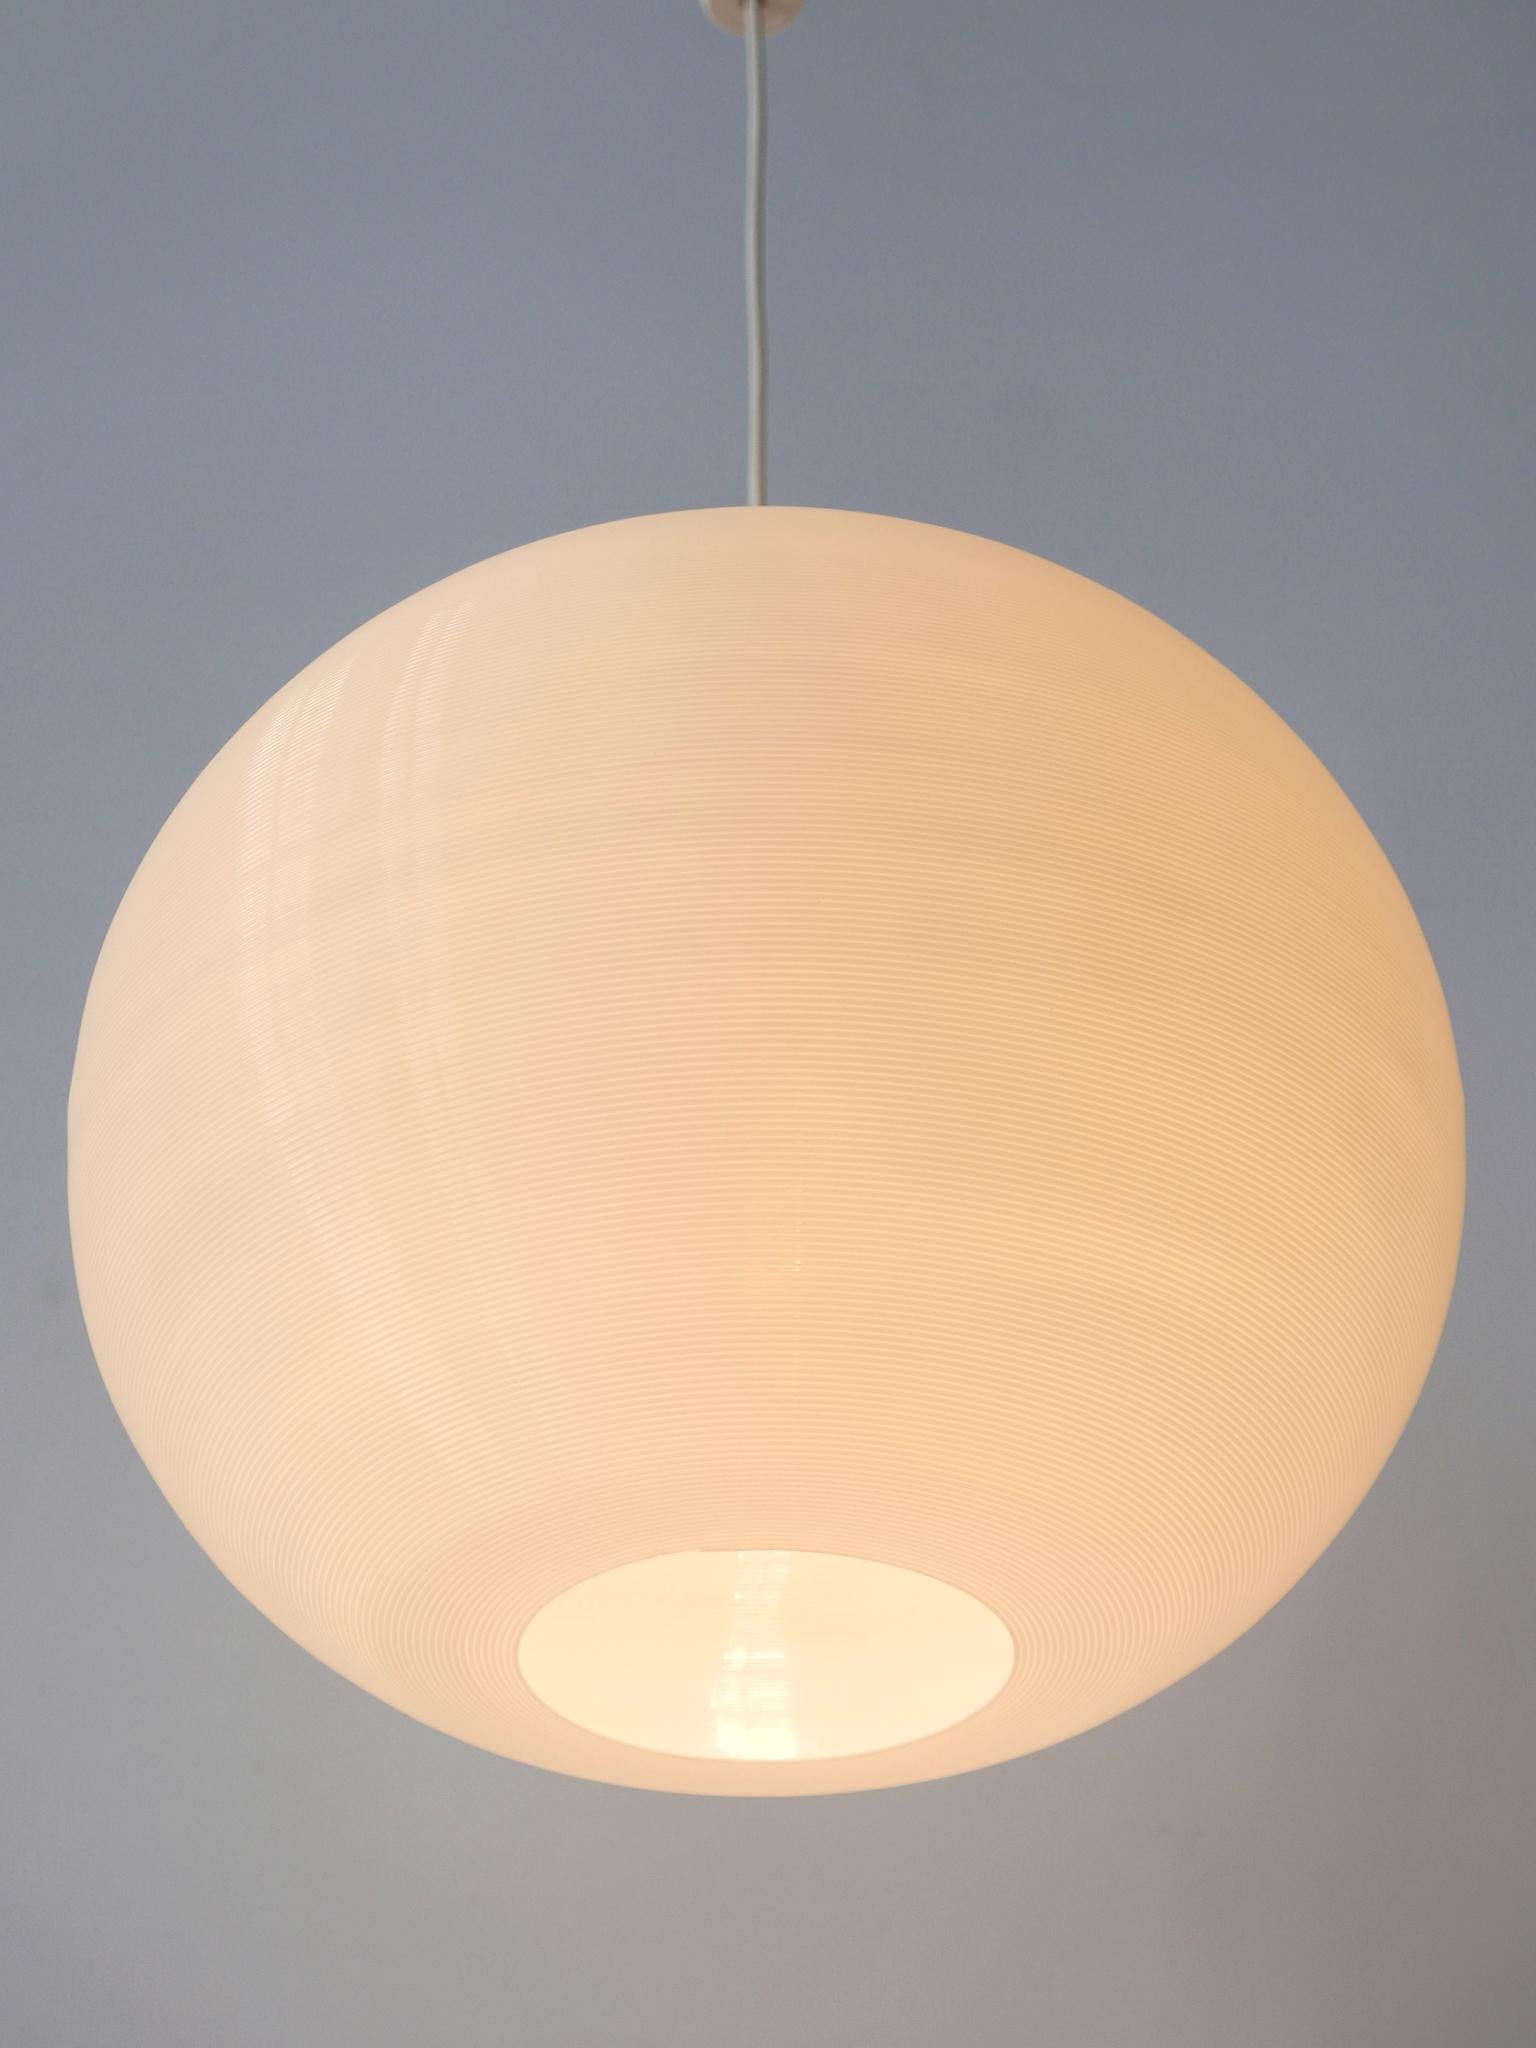 Rare and lovely Mid-Century Modern pendant lamp or hanging light. Designed by Yasha Heifetz for Rotaflex Heifetz, 1960s, USA.

Executed in spun plastic, it comes with 1 x E27 / E26 Edison screw fit bulb holder, is wired and in working condition. It